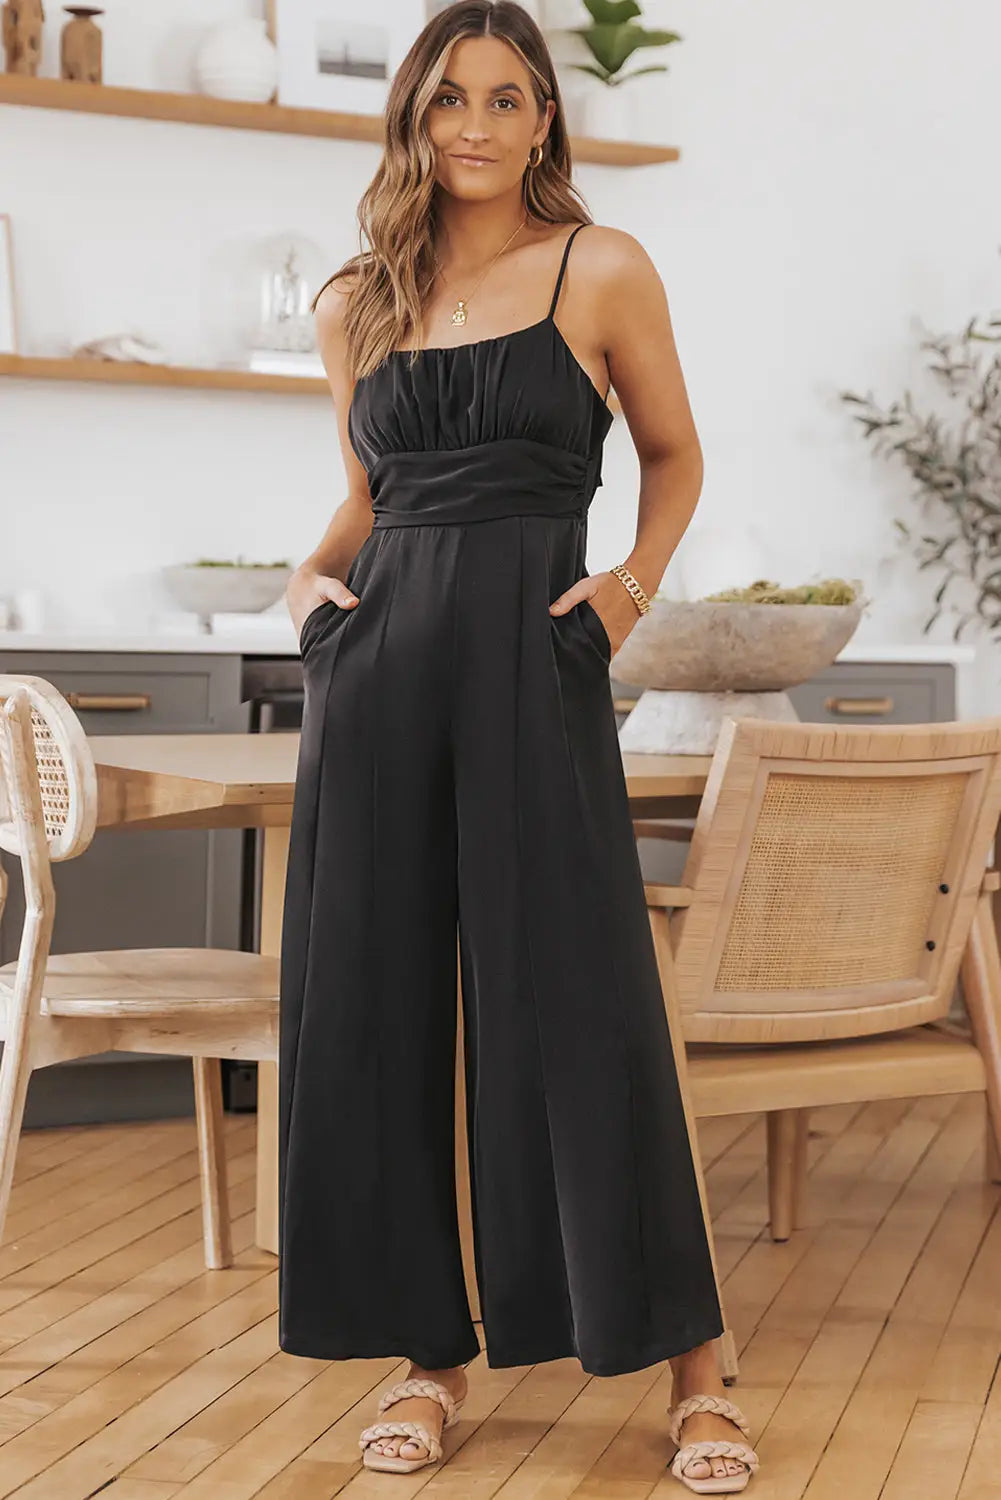 Black spaghetti straps backless knot wide-leg jumpsuit - s / 100% polyester - jumpsuits & rompers